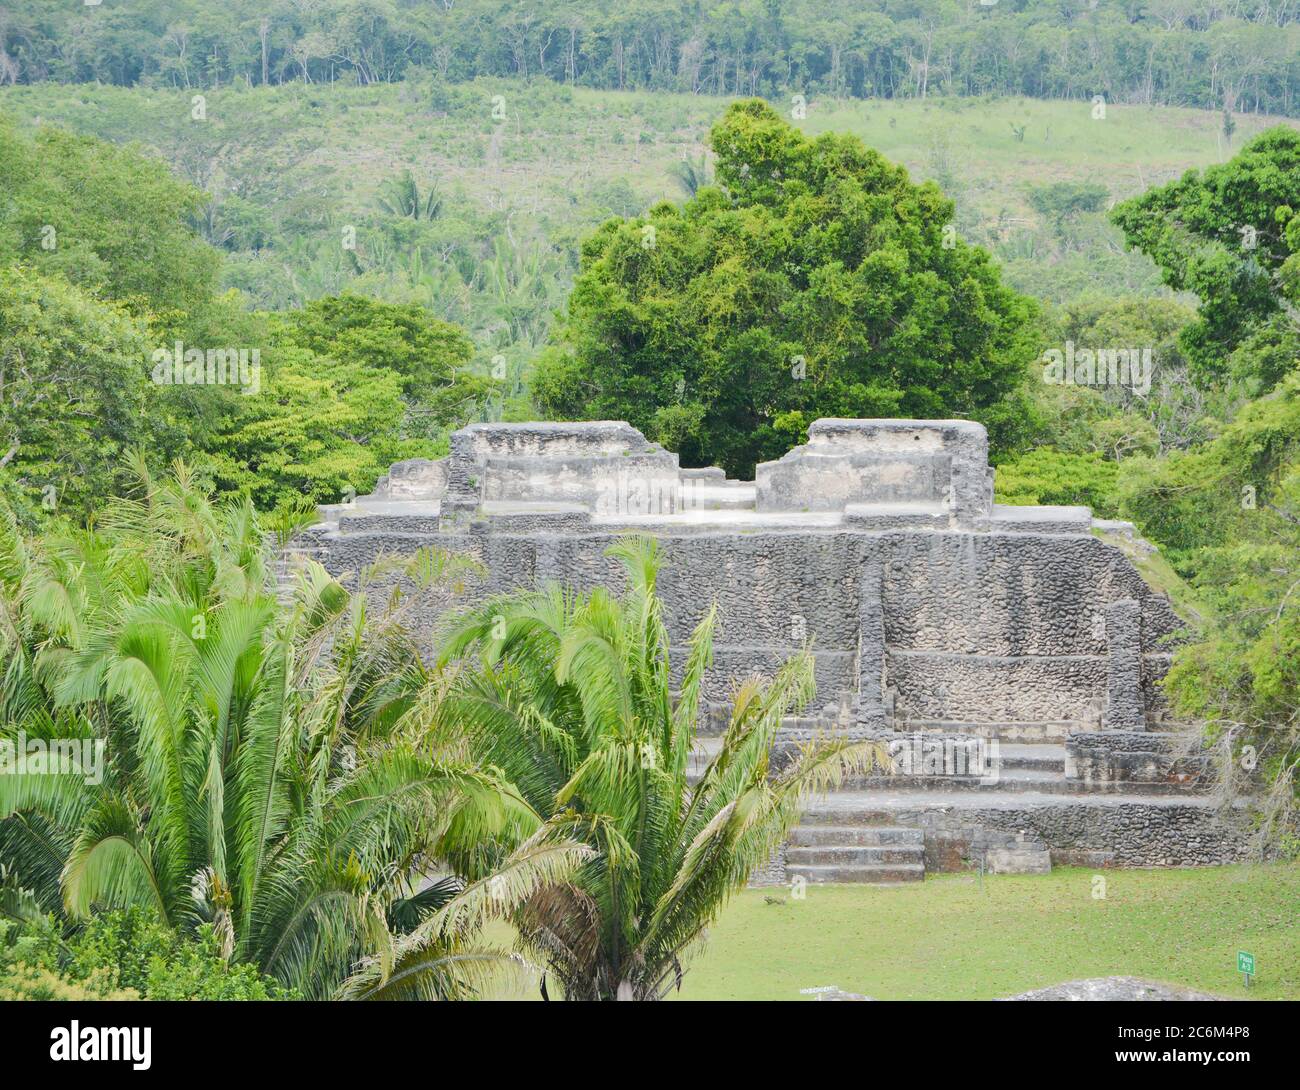 Historic ancient city ruins of Xunantunich Archaeological Reserve in Belize. Stock Photo